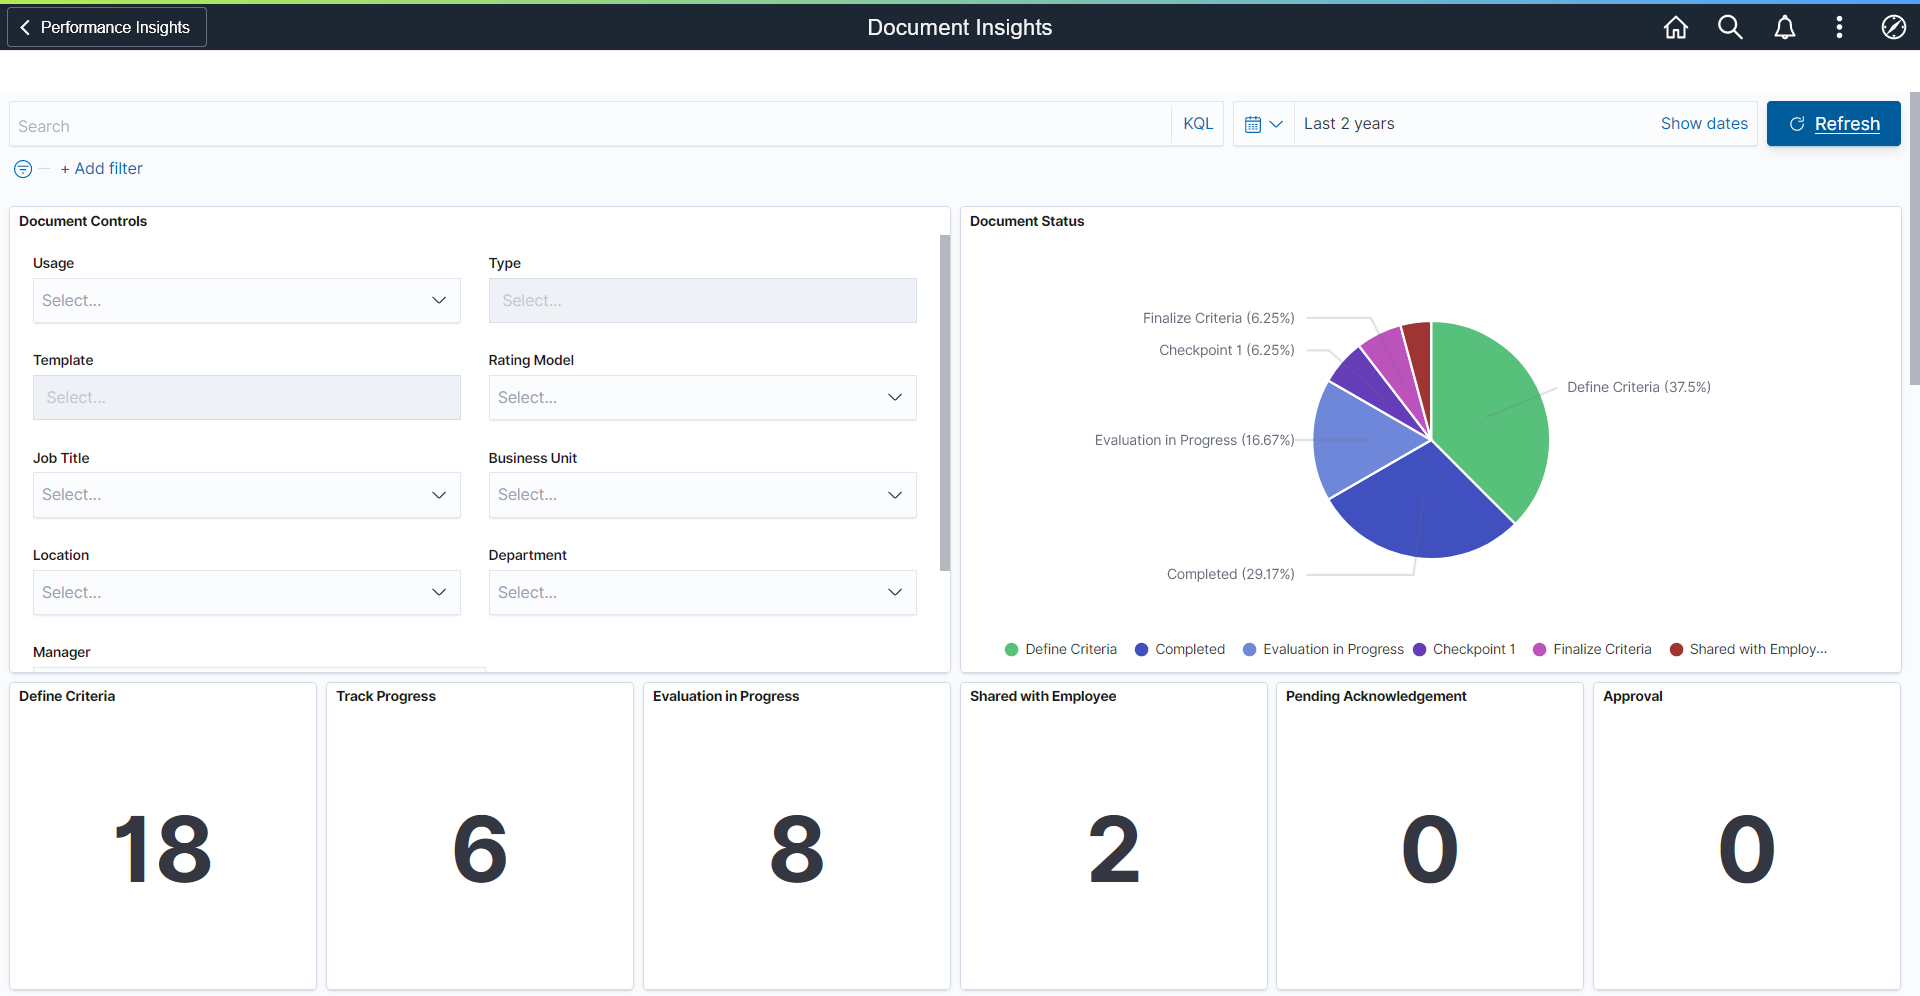 Document Insights dashboard (1 of 5)